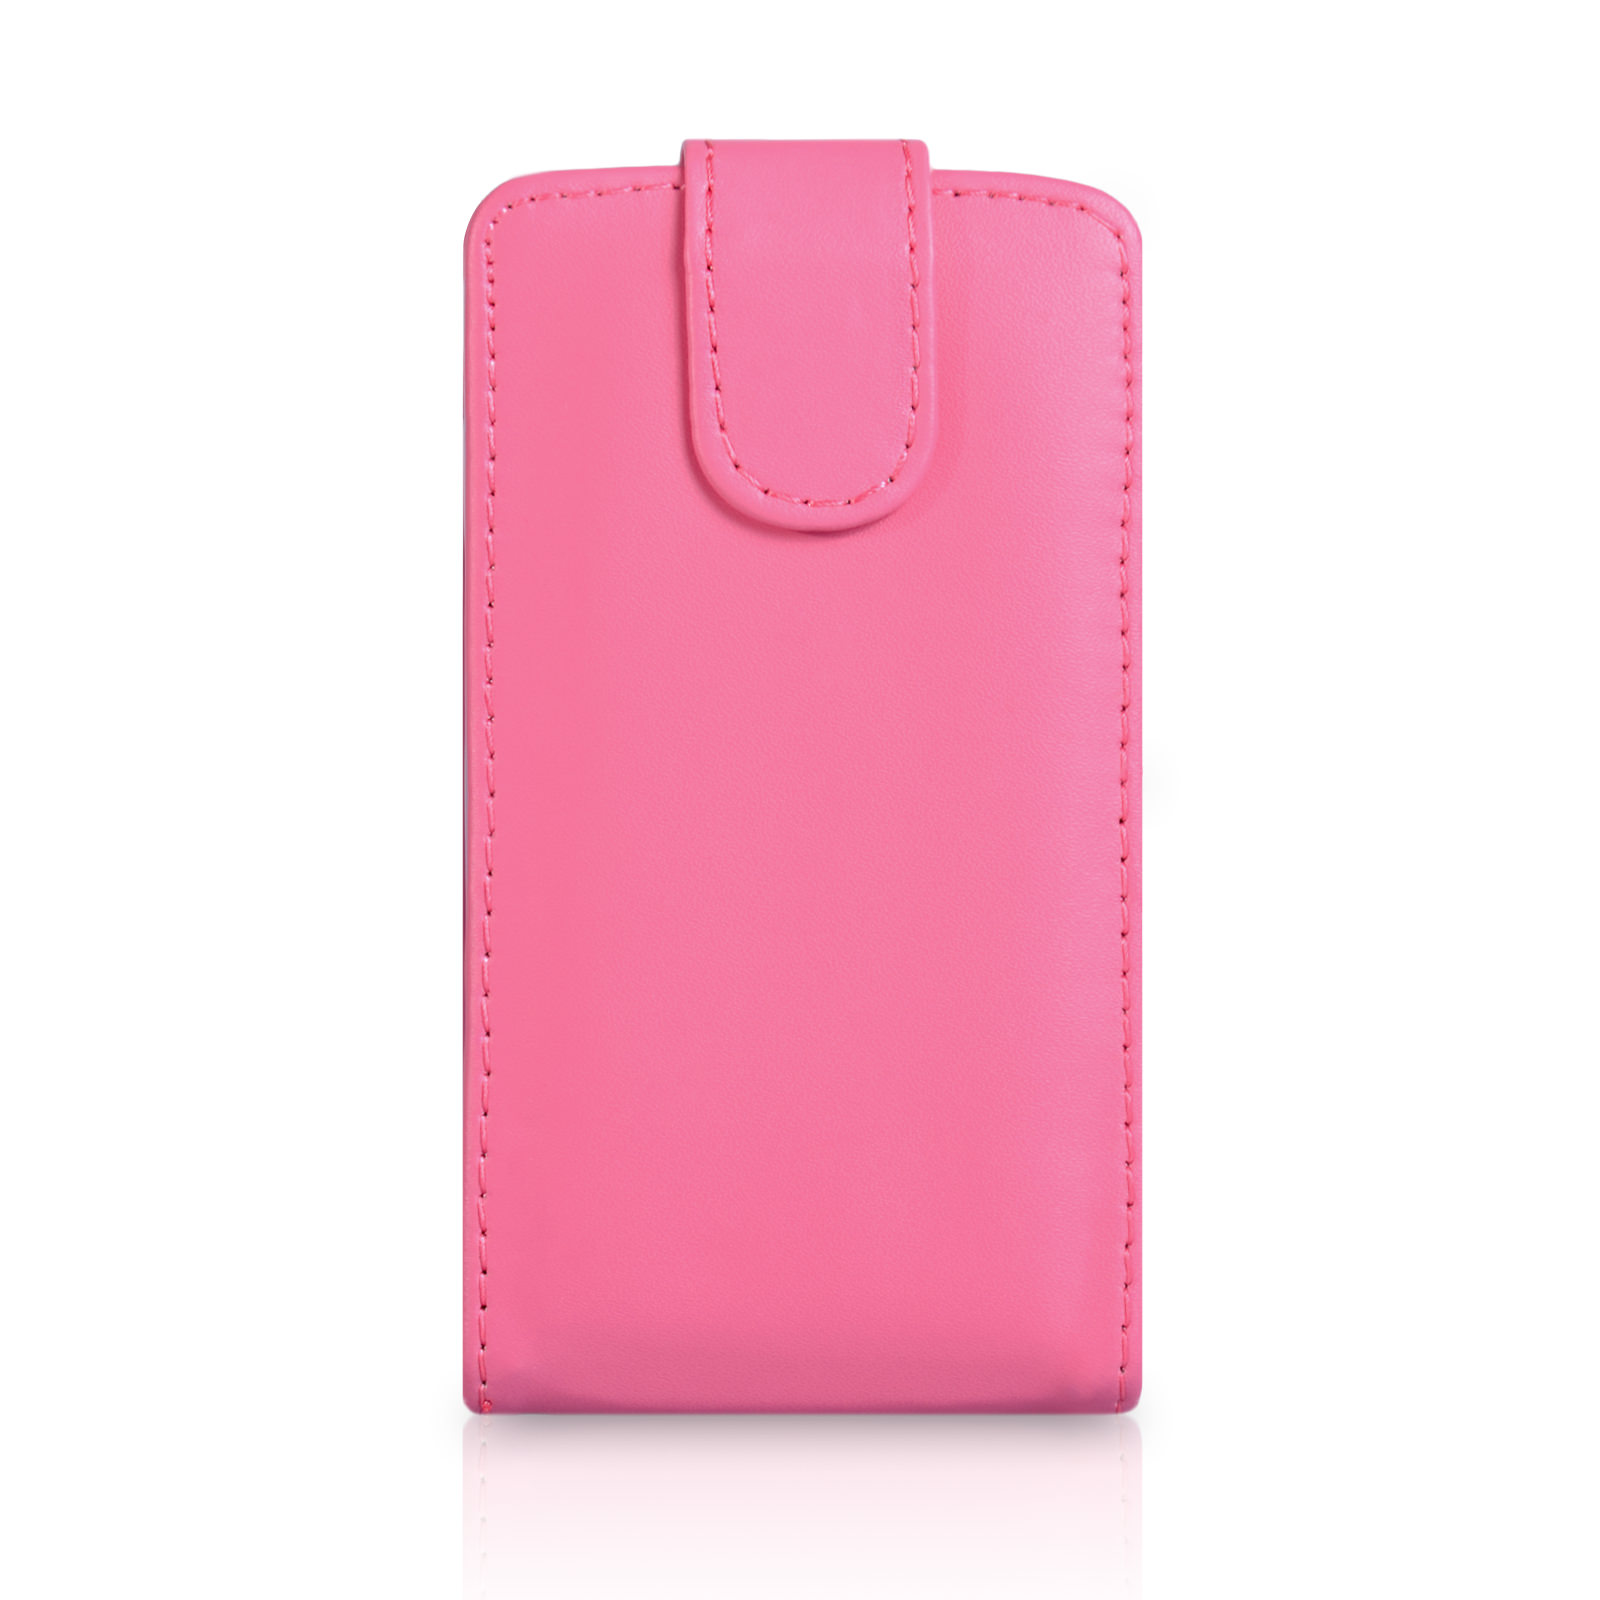 YouSave Accessories LG L70 Leather-Effect Flip Case - Hot Pink